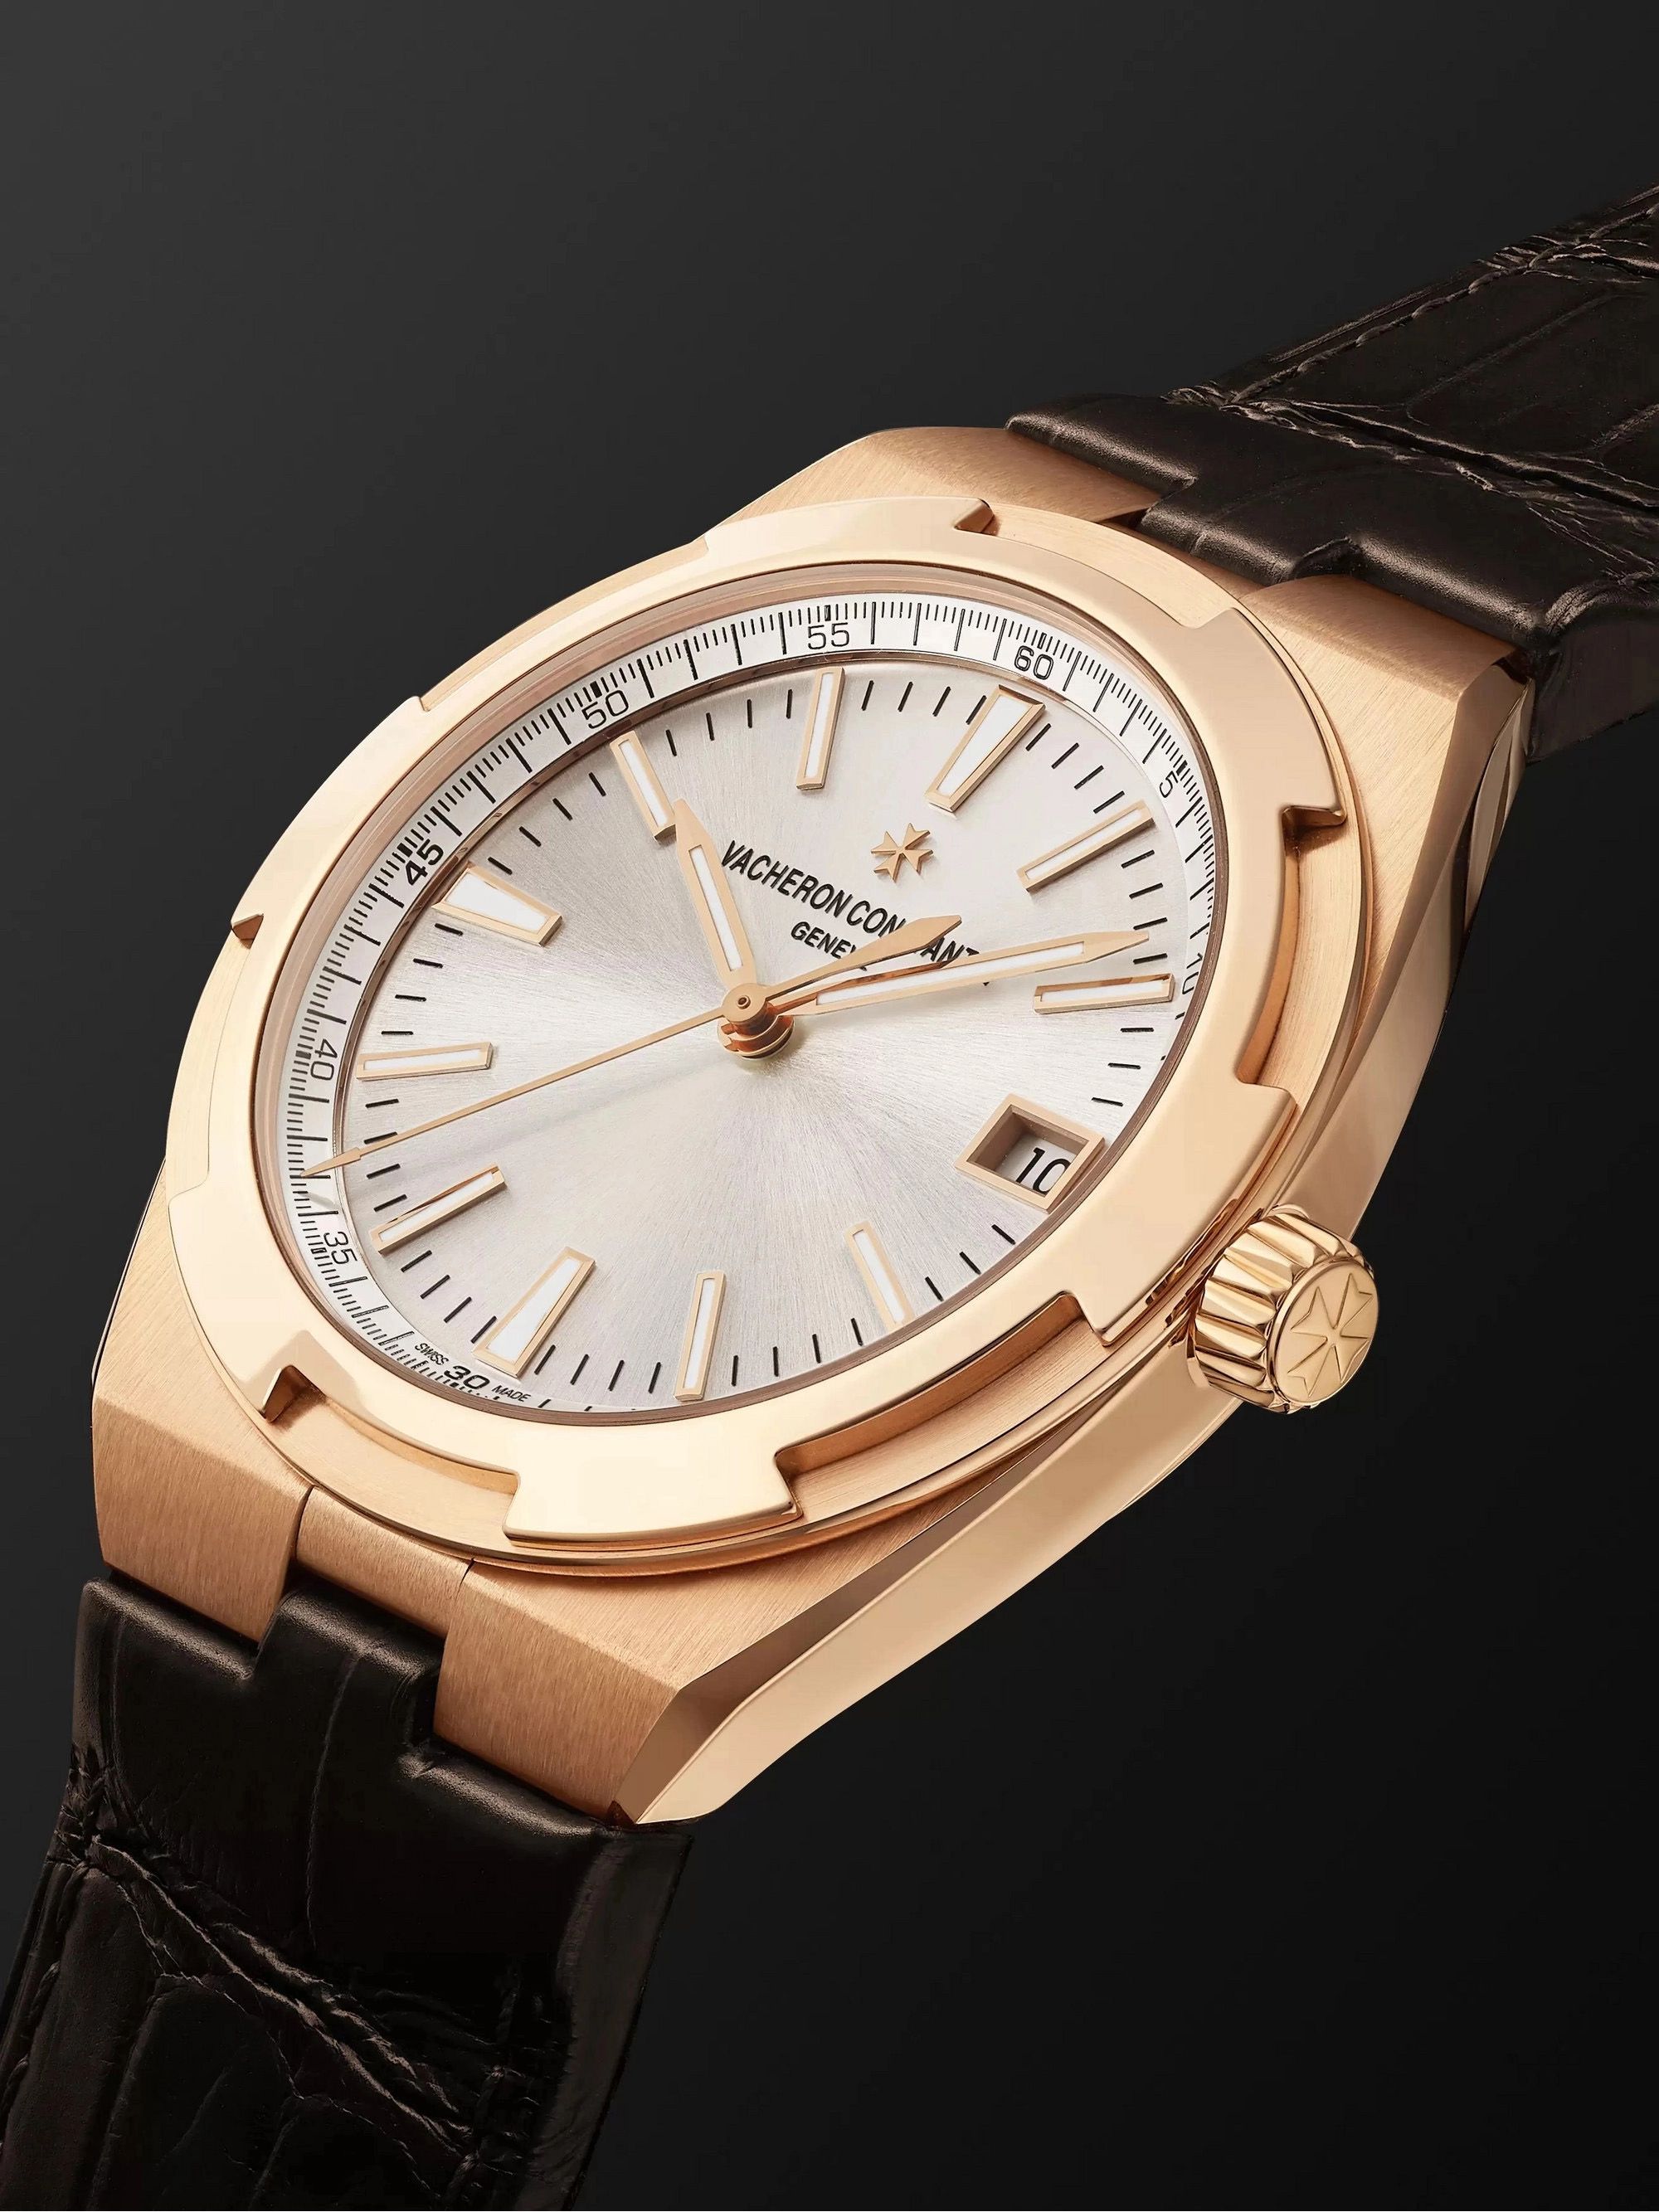 VACHERON CONSTANTIN Overseas Automatic 41mm 18-Karat Pink Gold and Leather Watch, Ref. No. 4500V/000R-B127